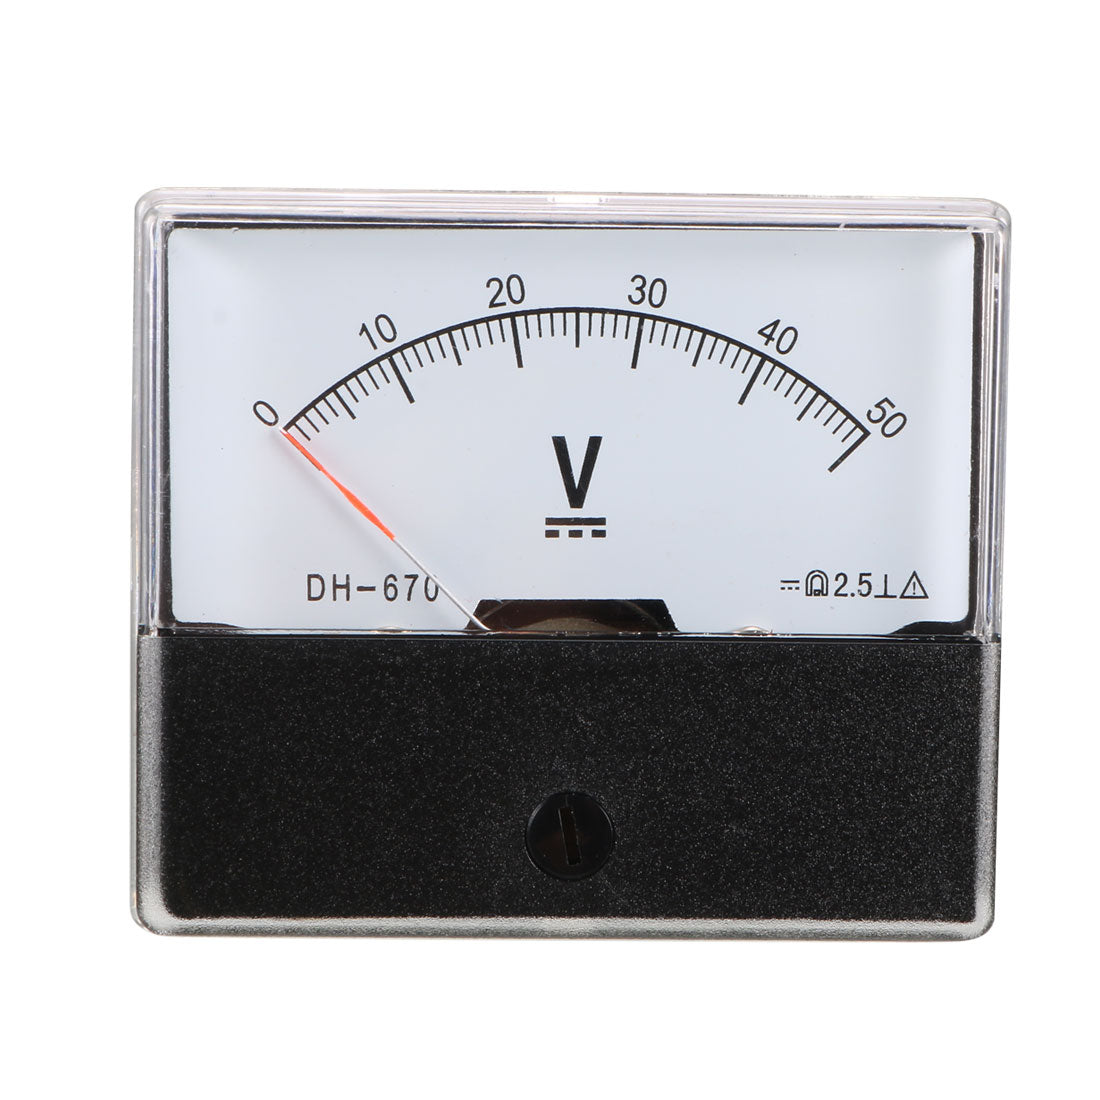 uxcell Uxcell DH670 Class 2.5 Accuracy DC 0-50V Analog Panel Meter Voltmeter Gauge